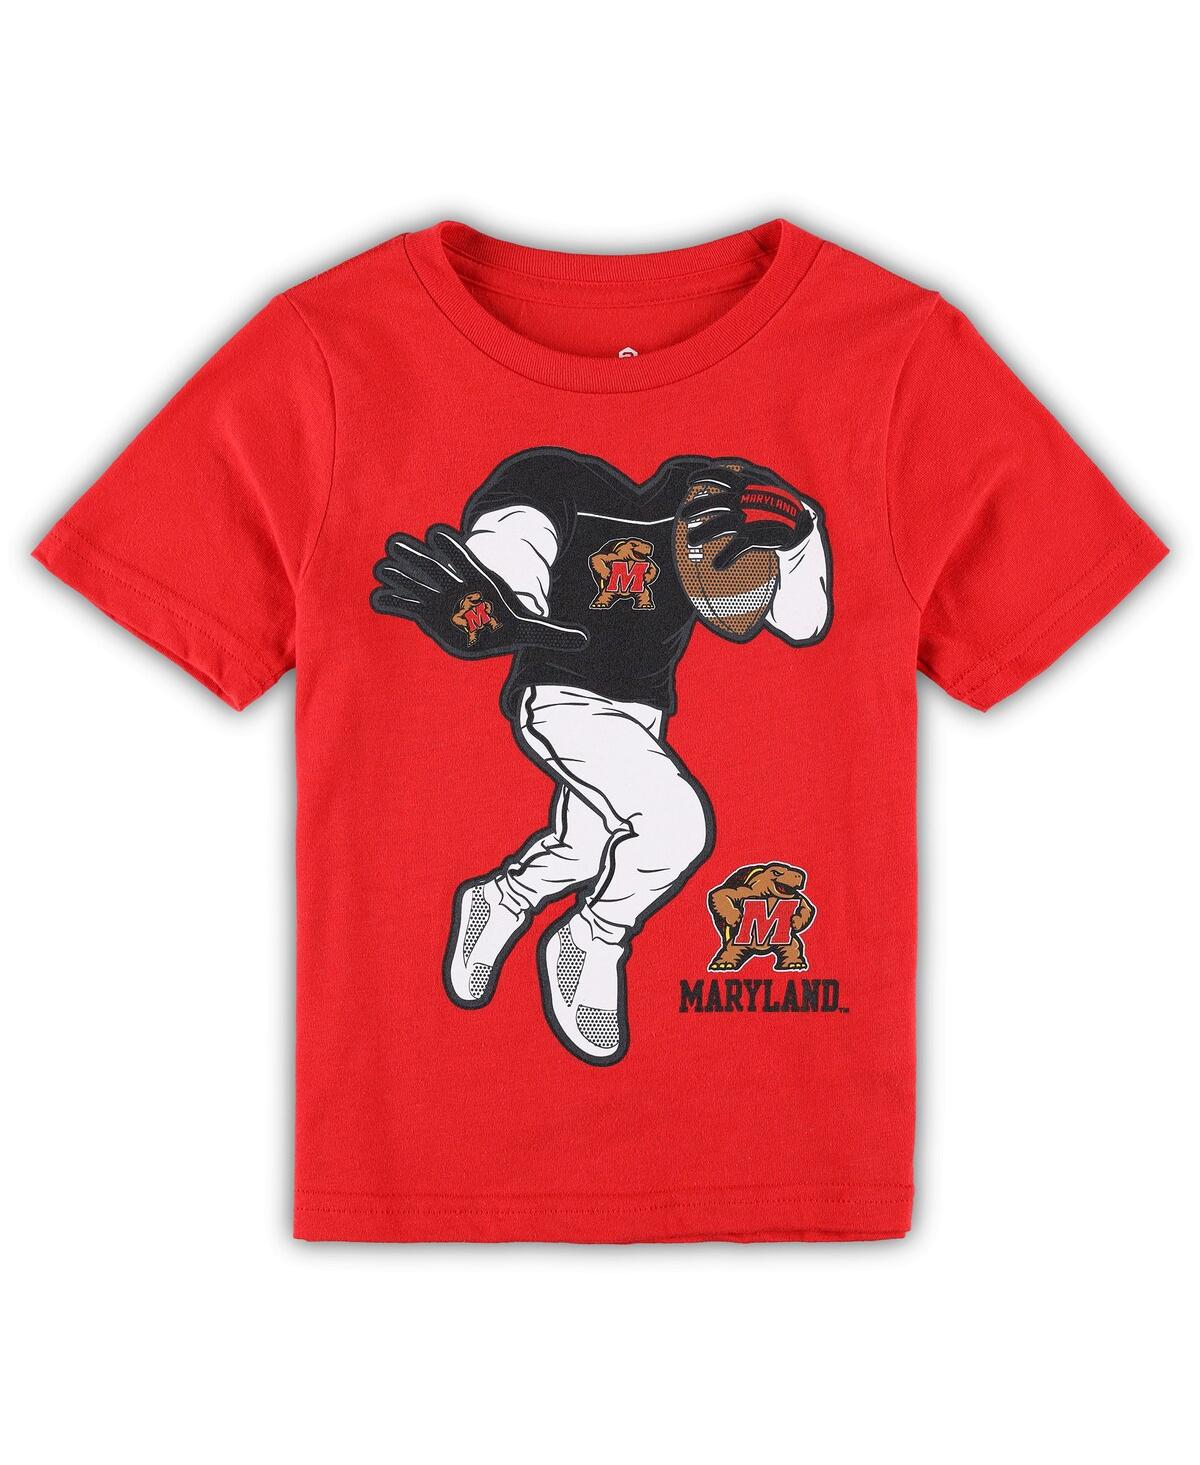 Outerstuff Babies' Toddler Boys And Girls Red Maryland Terrapins Stiff Arm T-shirt